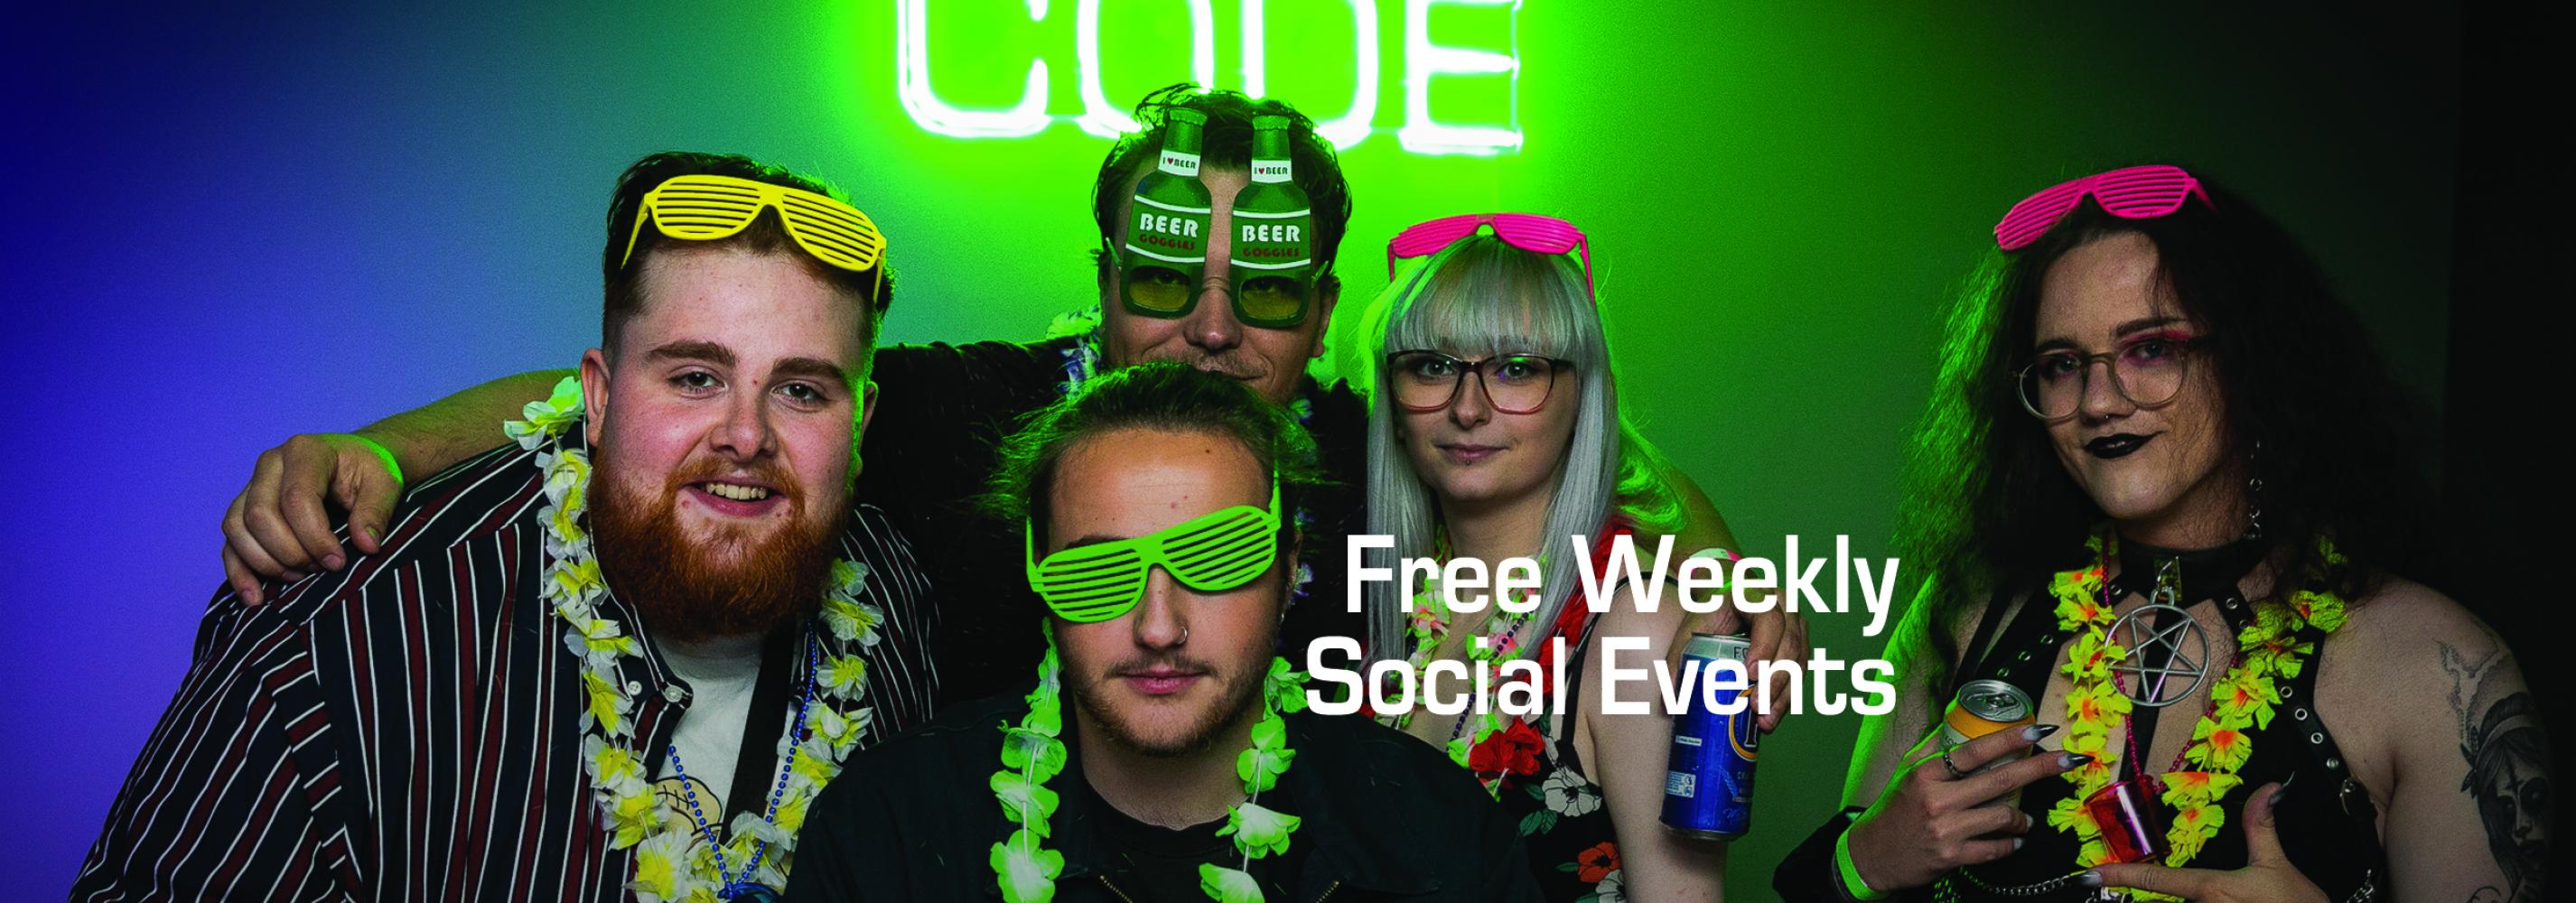 We host free weekly social events